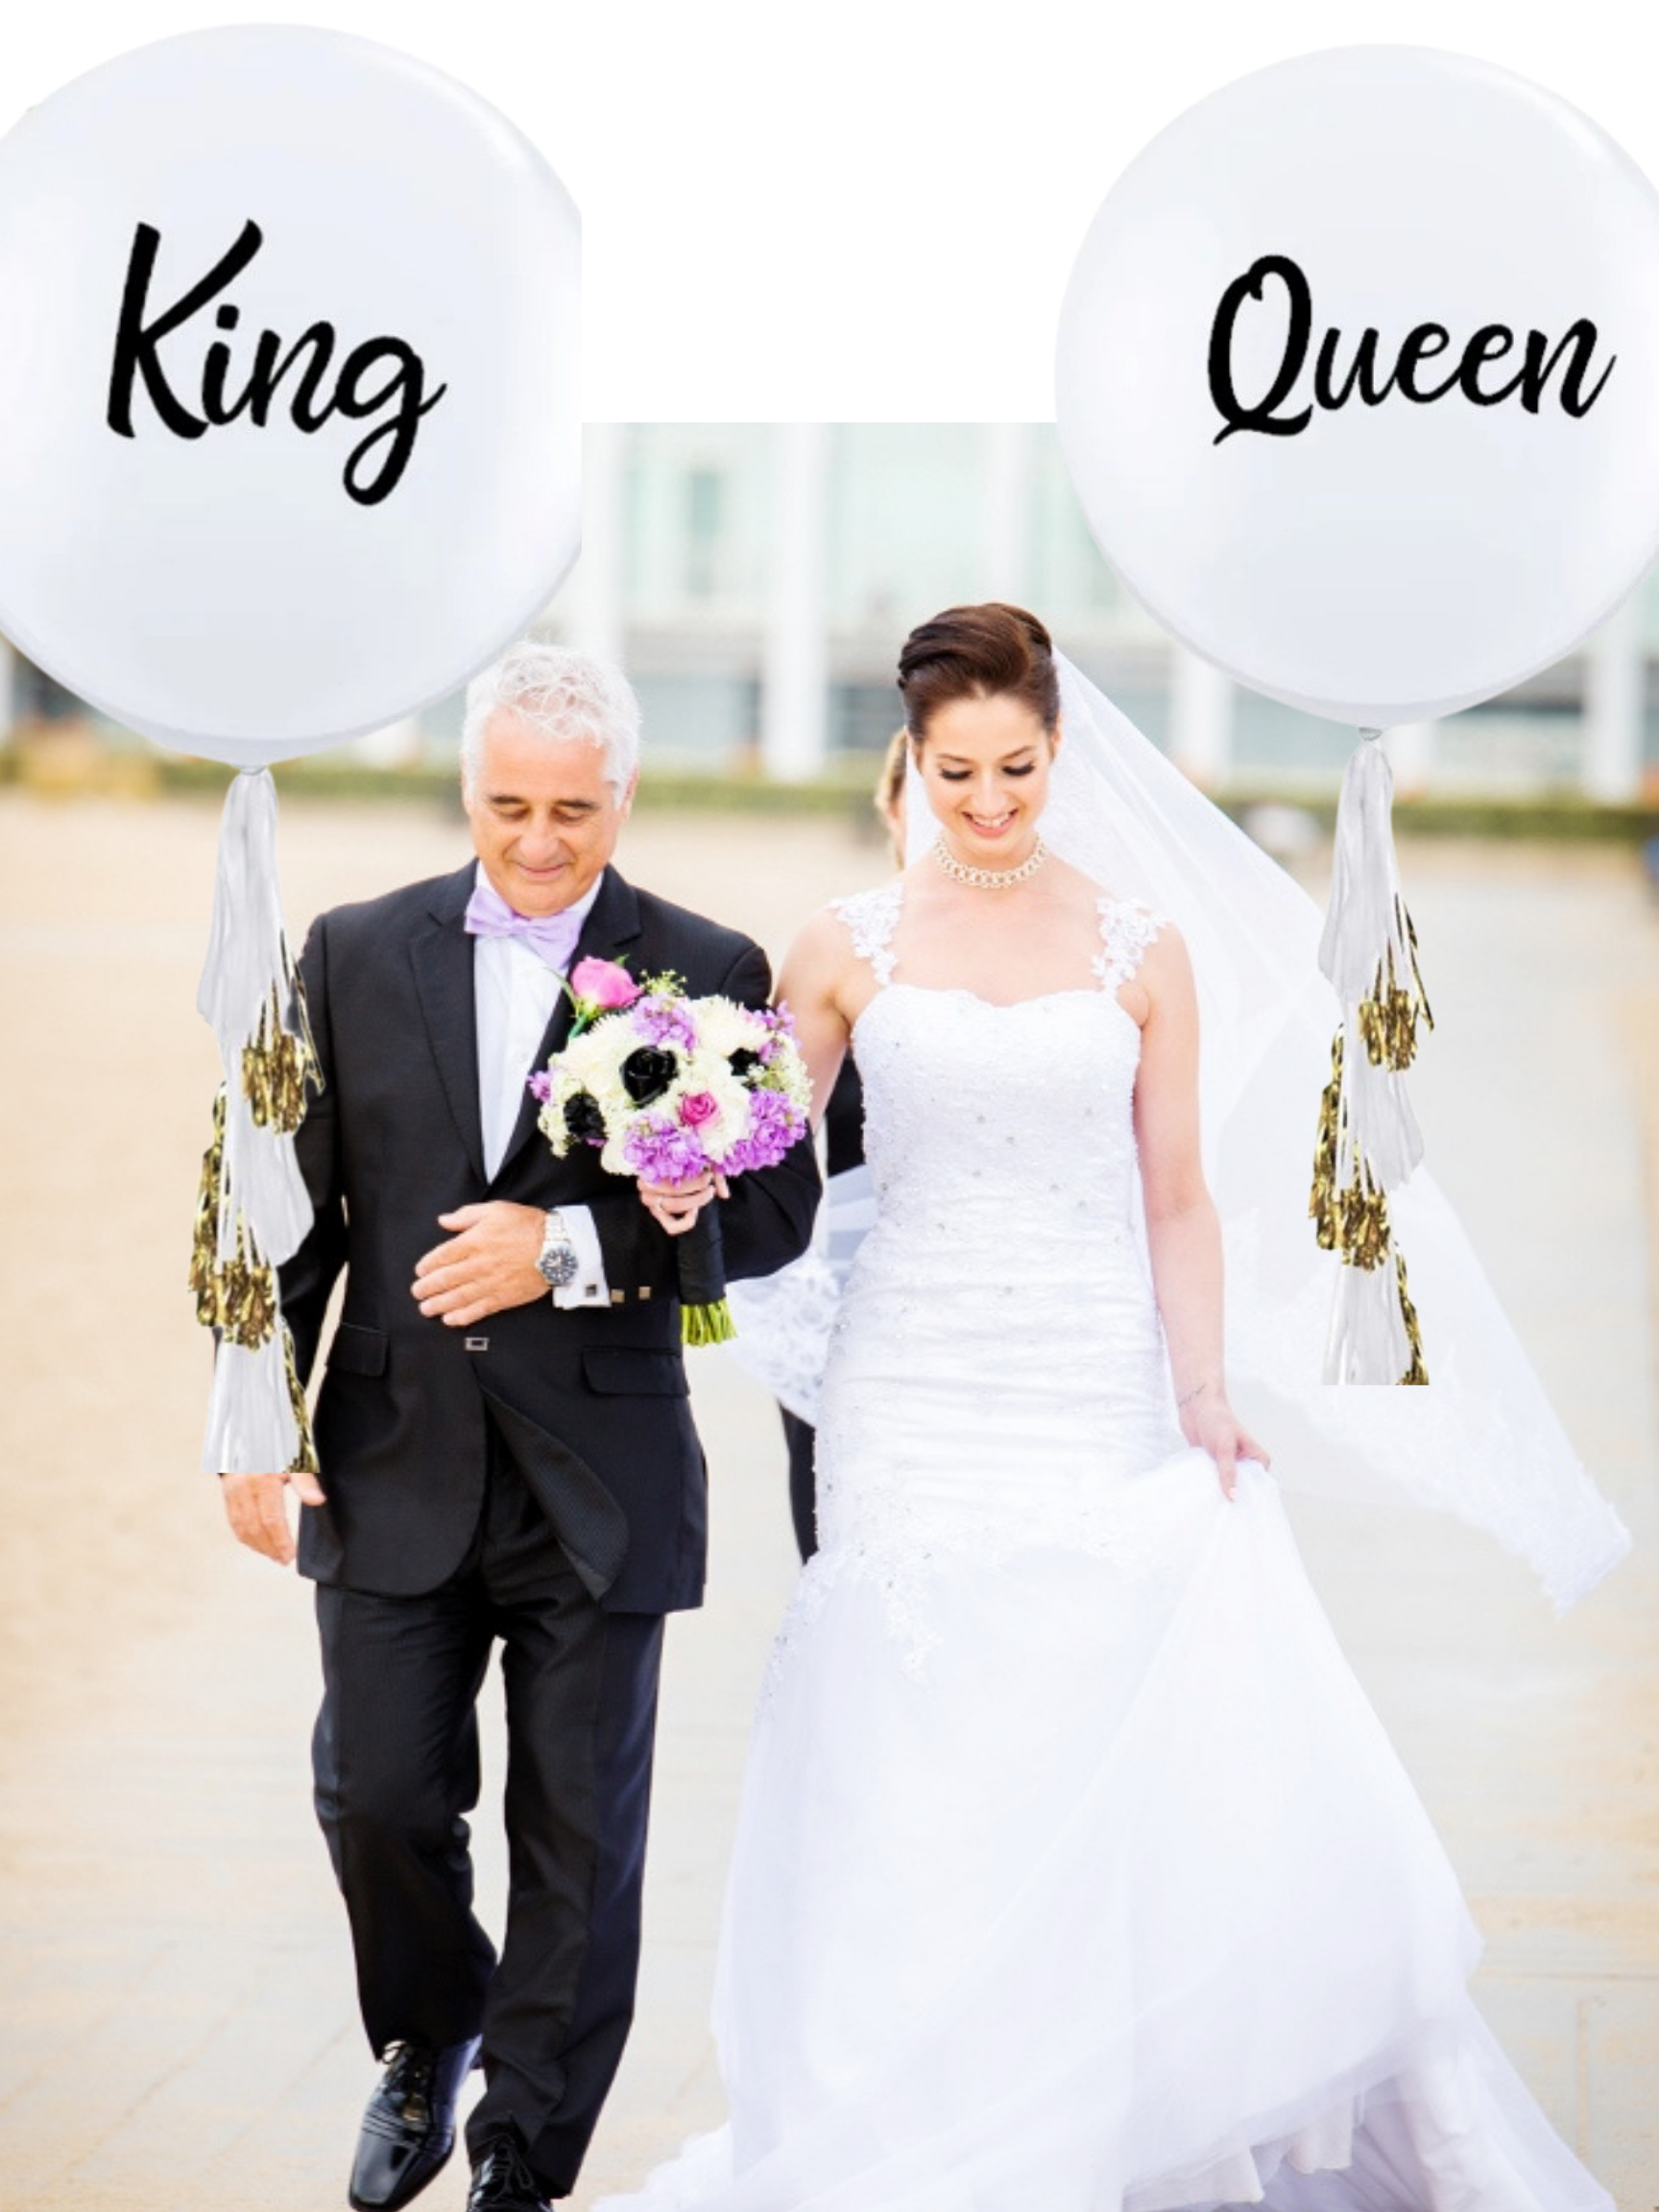 King and Queen Balloons Jumbo Size 36 inch with Gold and White Paper Tassels - Queen of the Castle Emporium